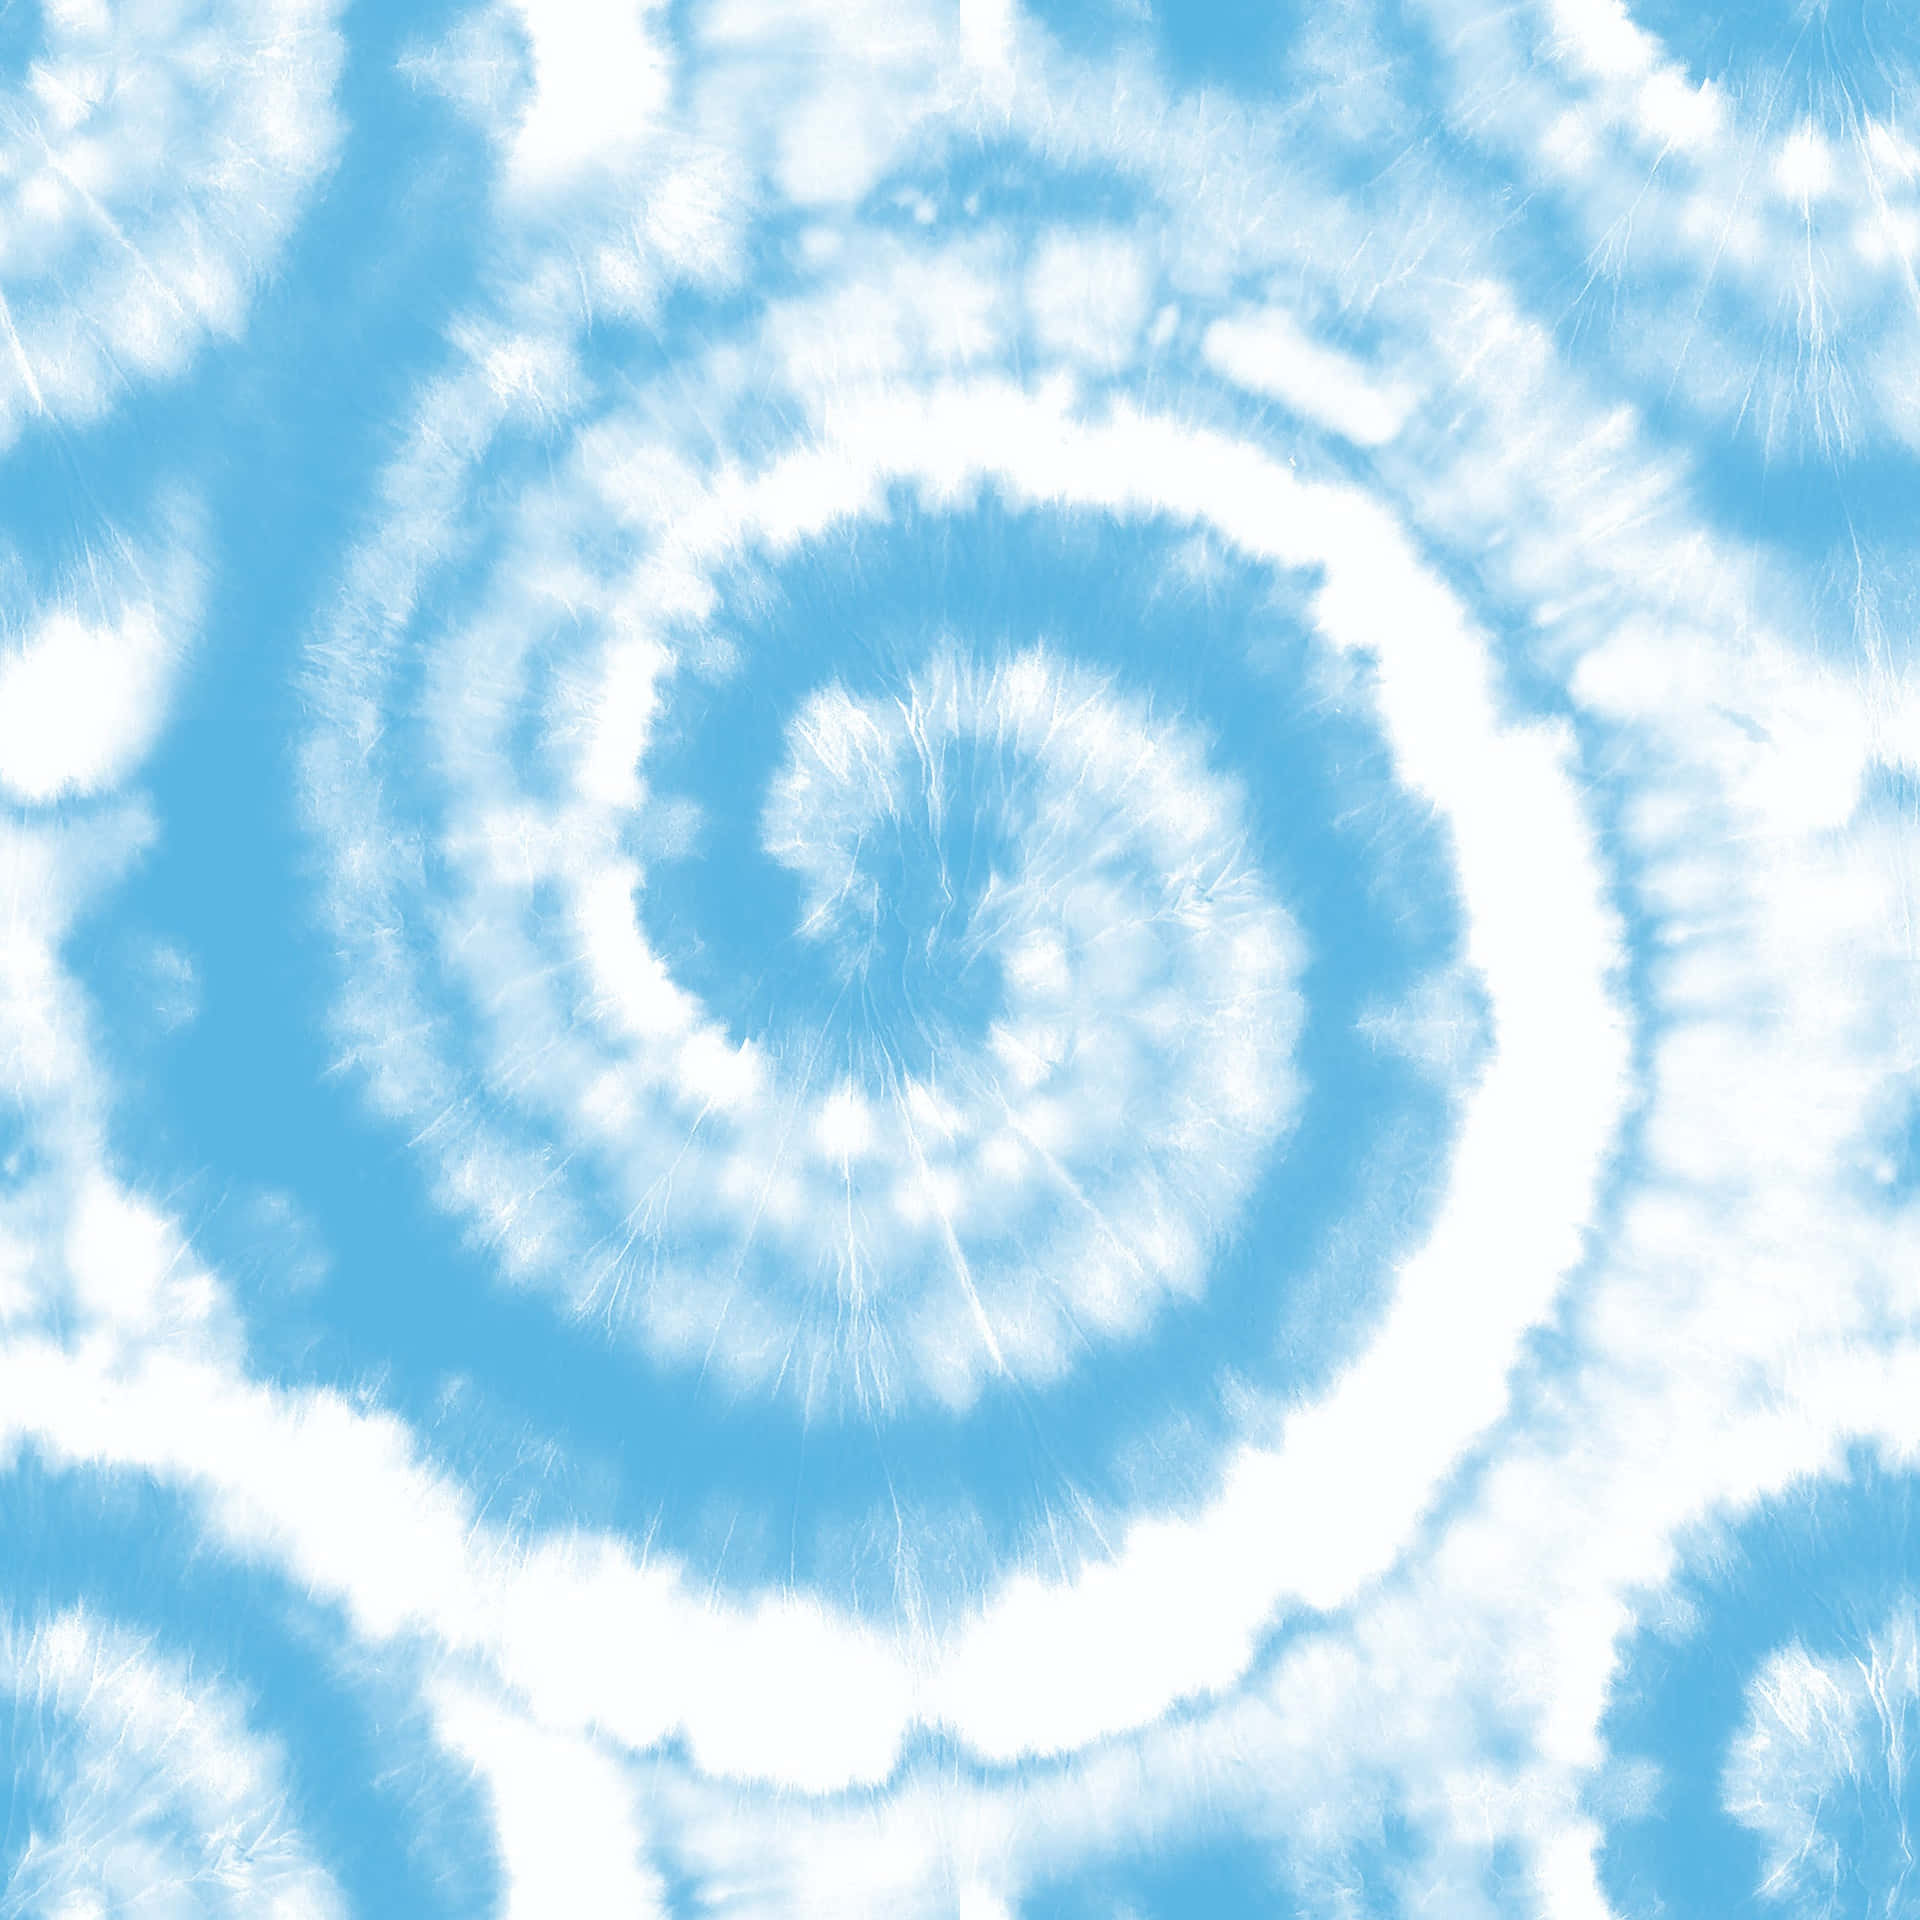 Download Funky blue tie-dye pattern with vibrantly colored swirls